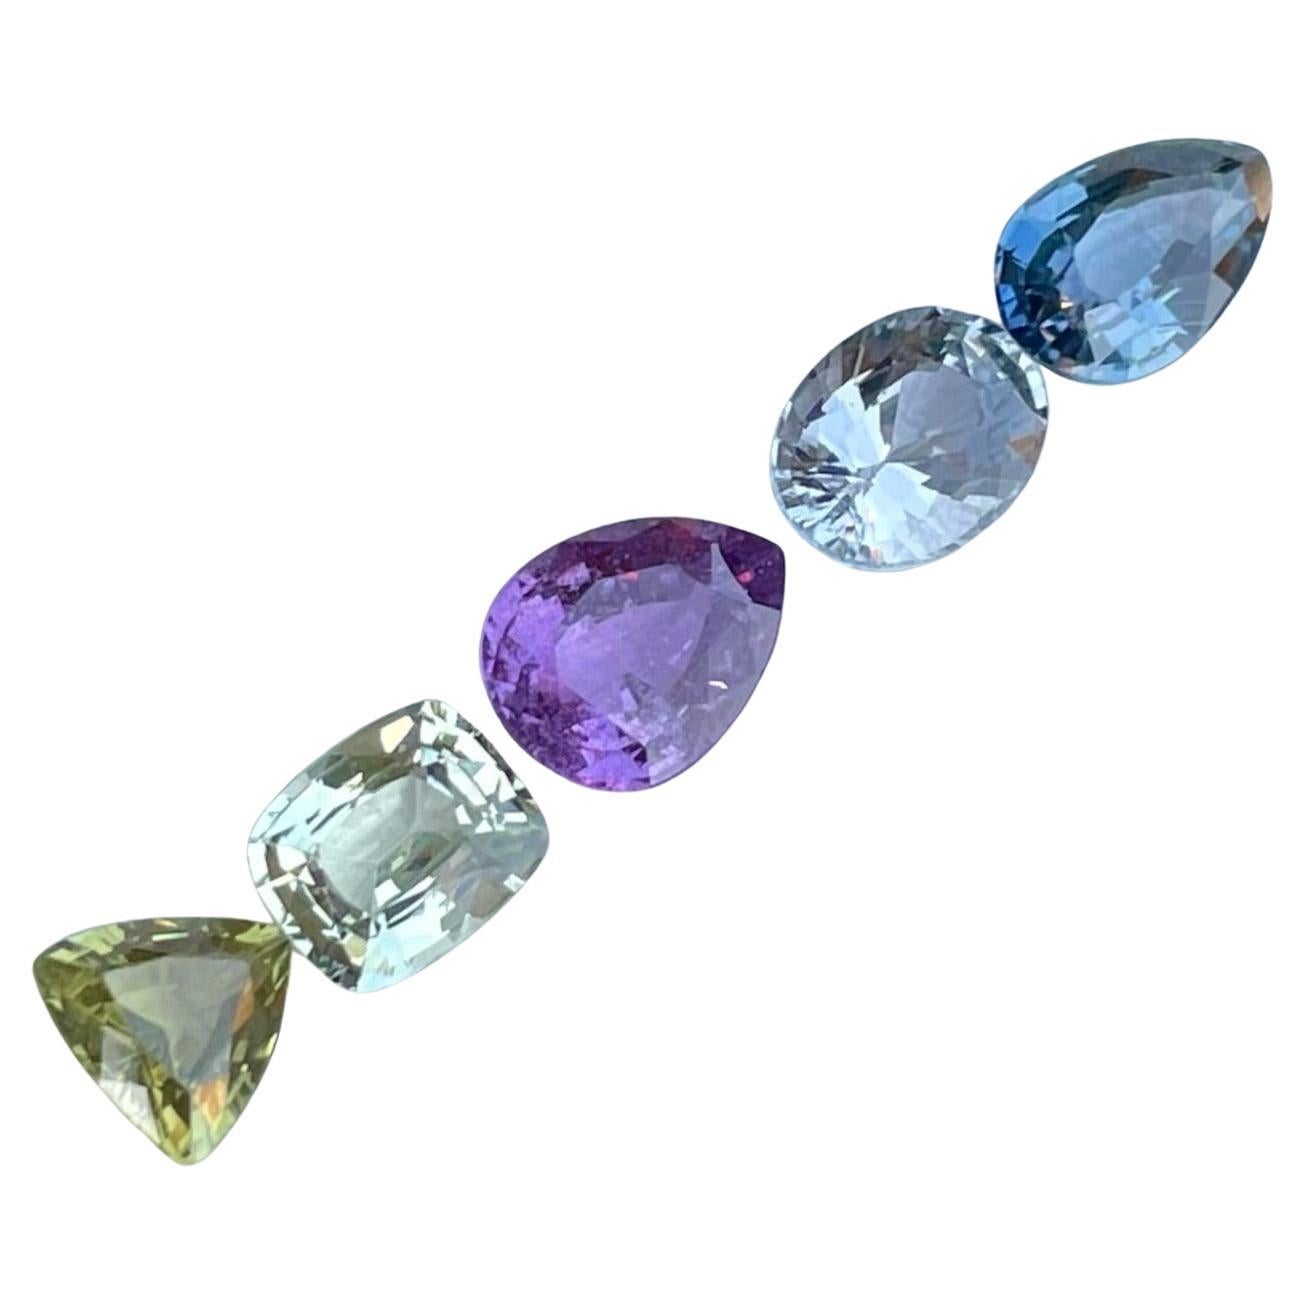 6.04 carats Colorful Stones Loose Sapphire Lot Natural Gemstones From Sri Lanka